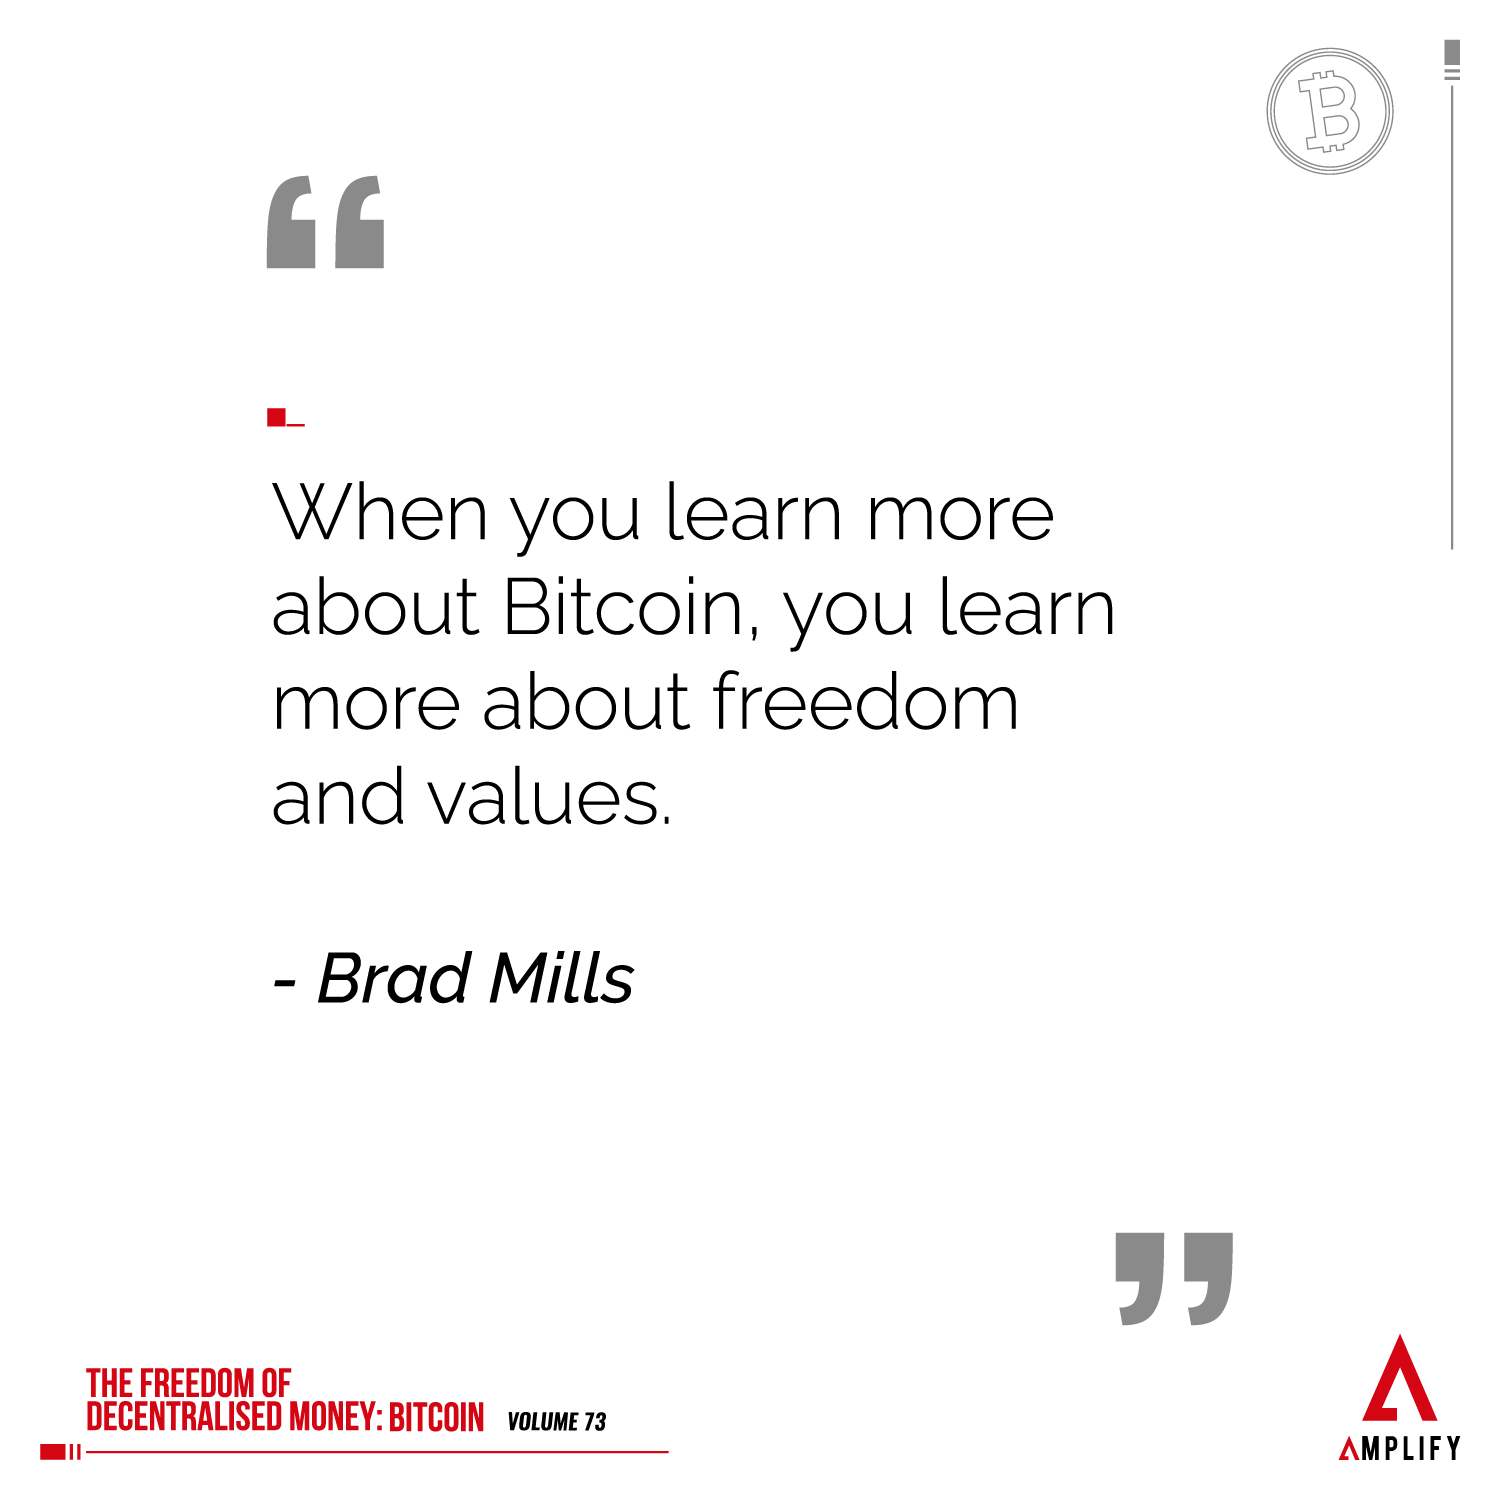 decortaive image with the quote “When you learn more about Bitcoin, you learn more about freedom and values.” by Brad Mills